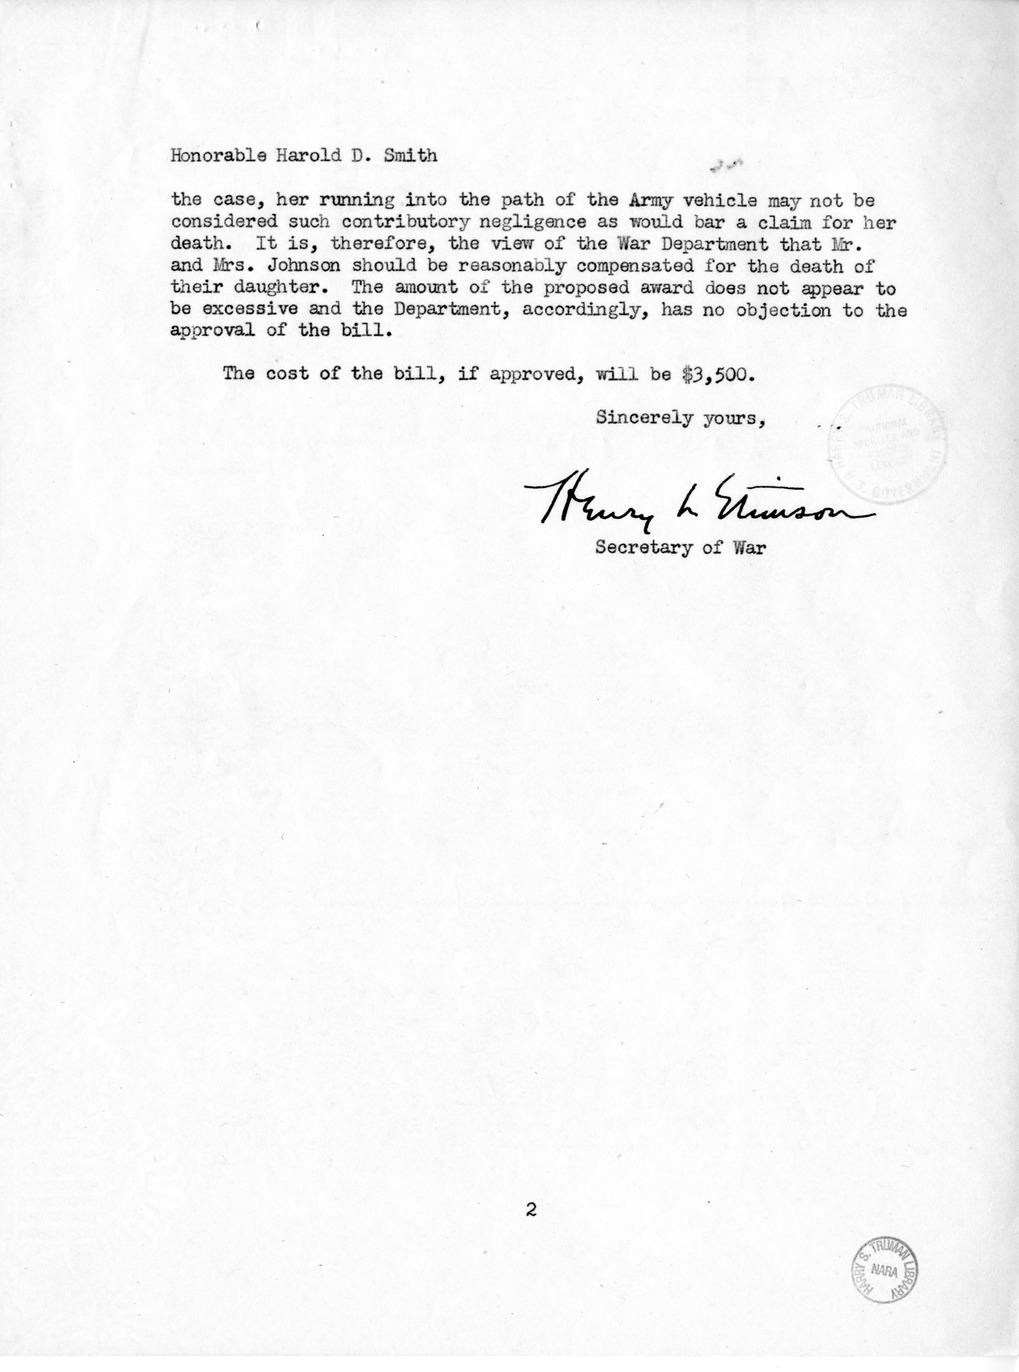 Memorandum from Frederick Bailey to M. C. Latta, S. 426, For the Relief of Mr. and Mrs. Walter M. Johnson, with Attachments